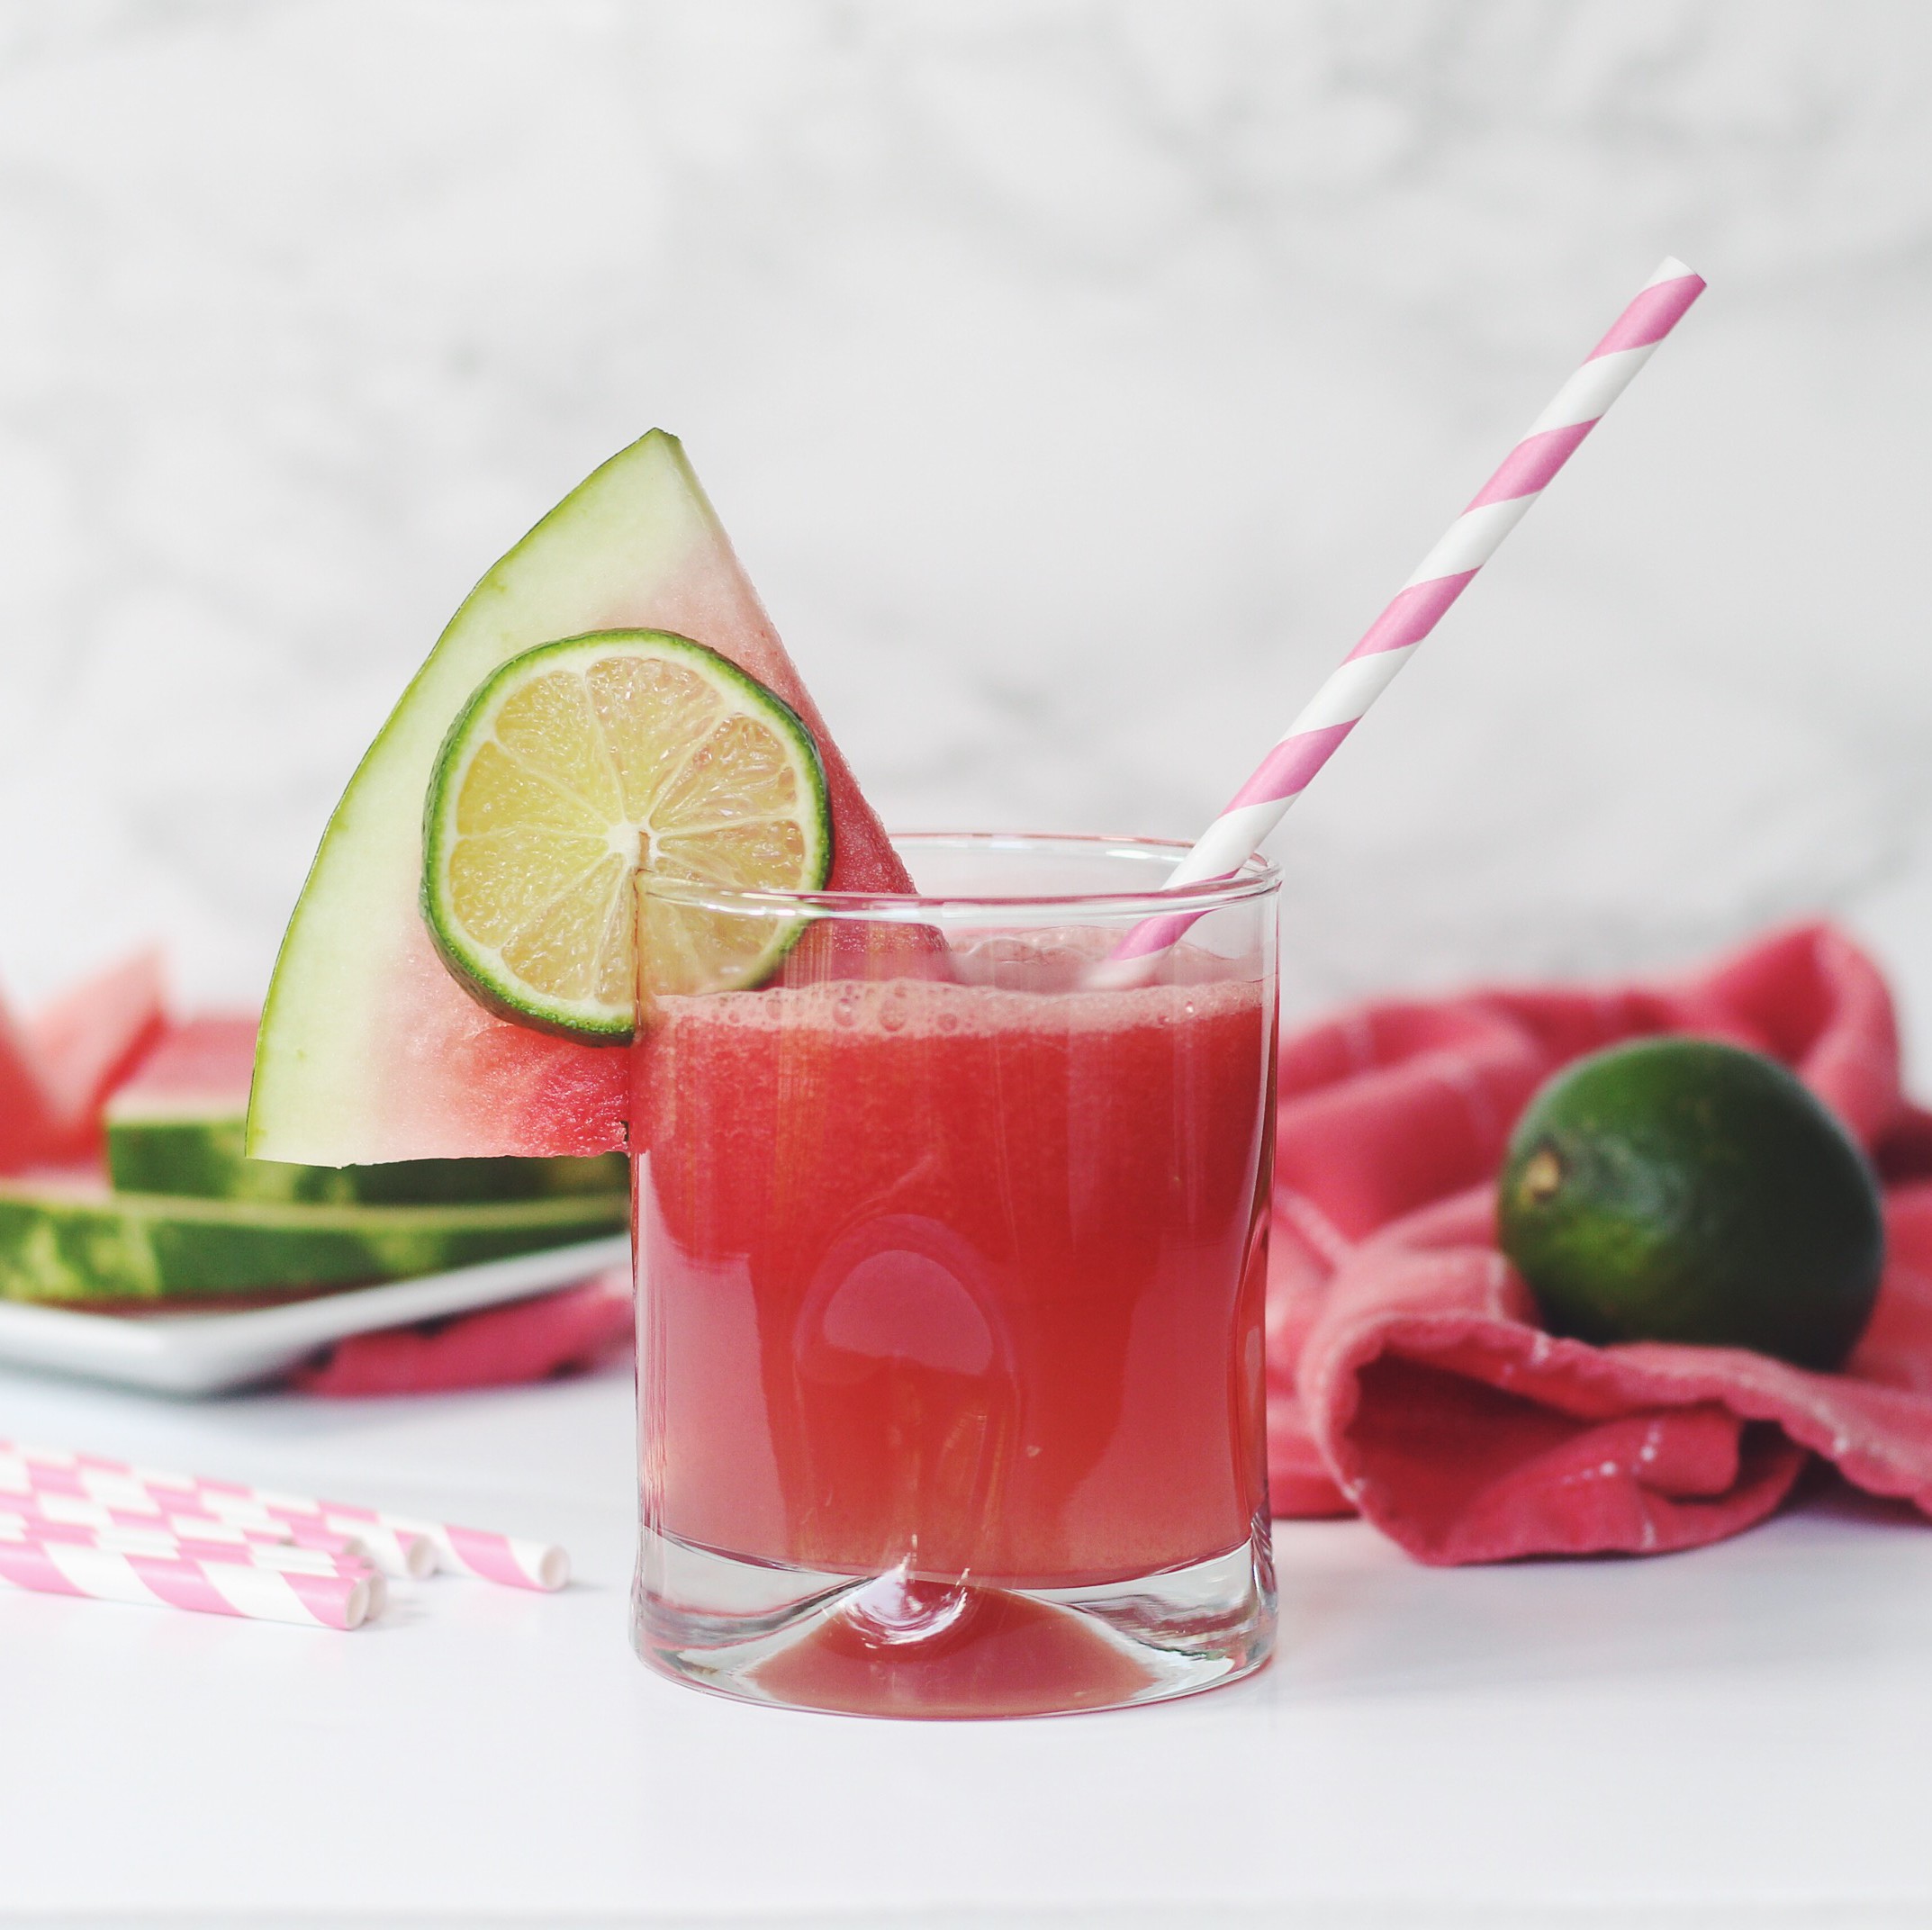 How To Make Fresh Watermelon Juice At Home In Padang City